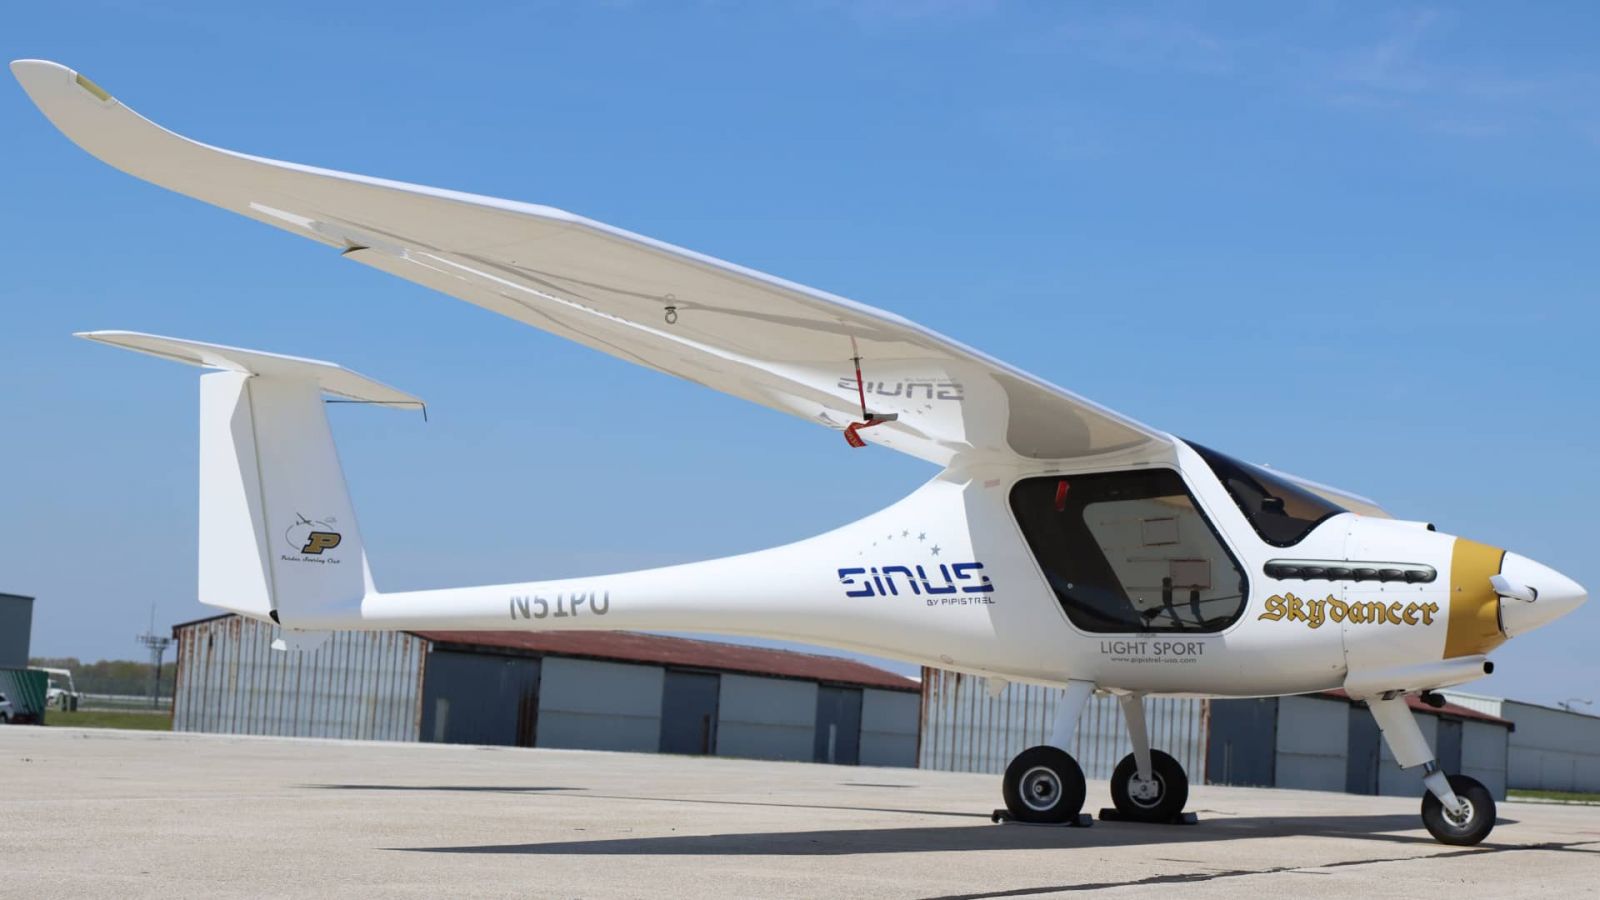 This Pipistrel aircraft at the Purdue University Airport can be modified for use in the Able Flight program, providing flight training to would-be pilots with disabilities. (Purdue University photo/John O'Malley)